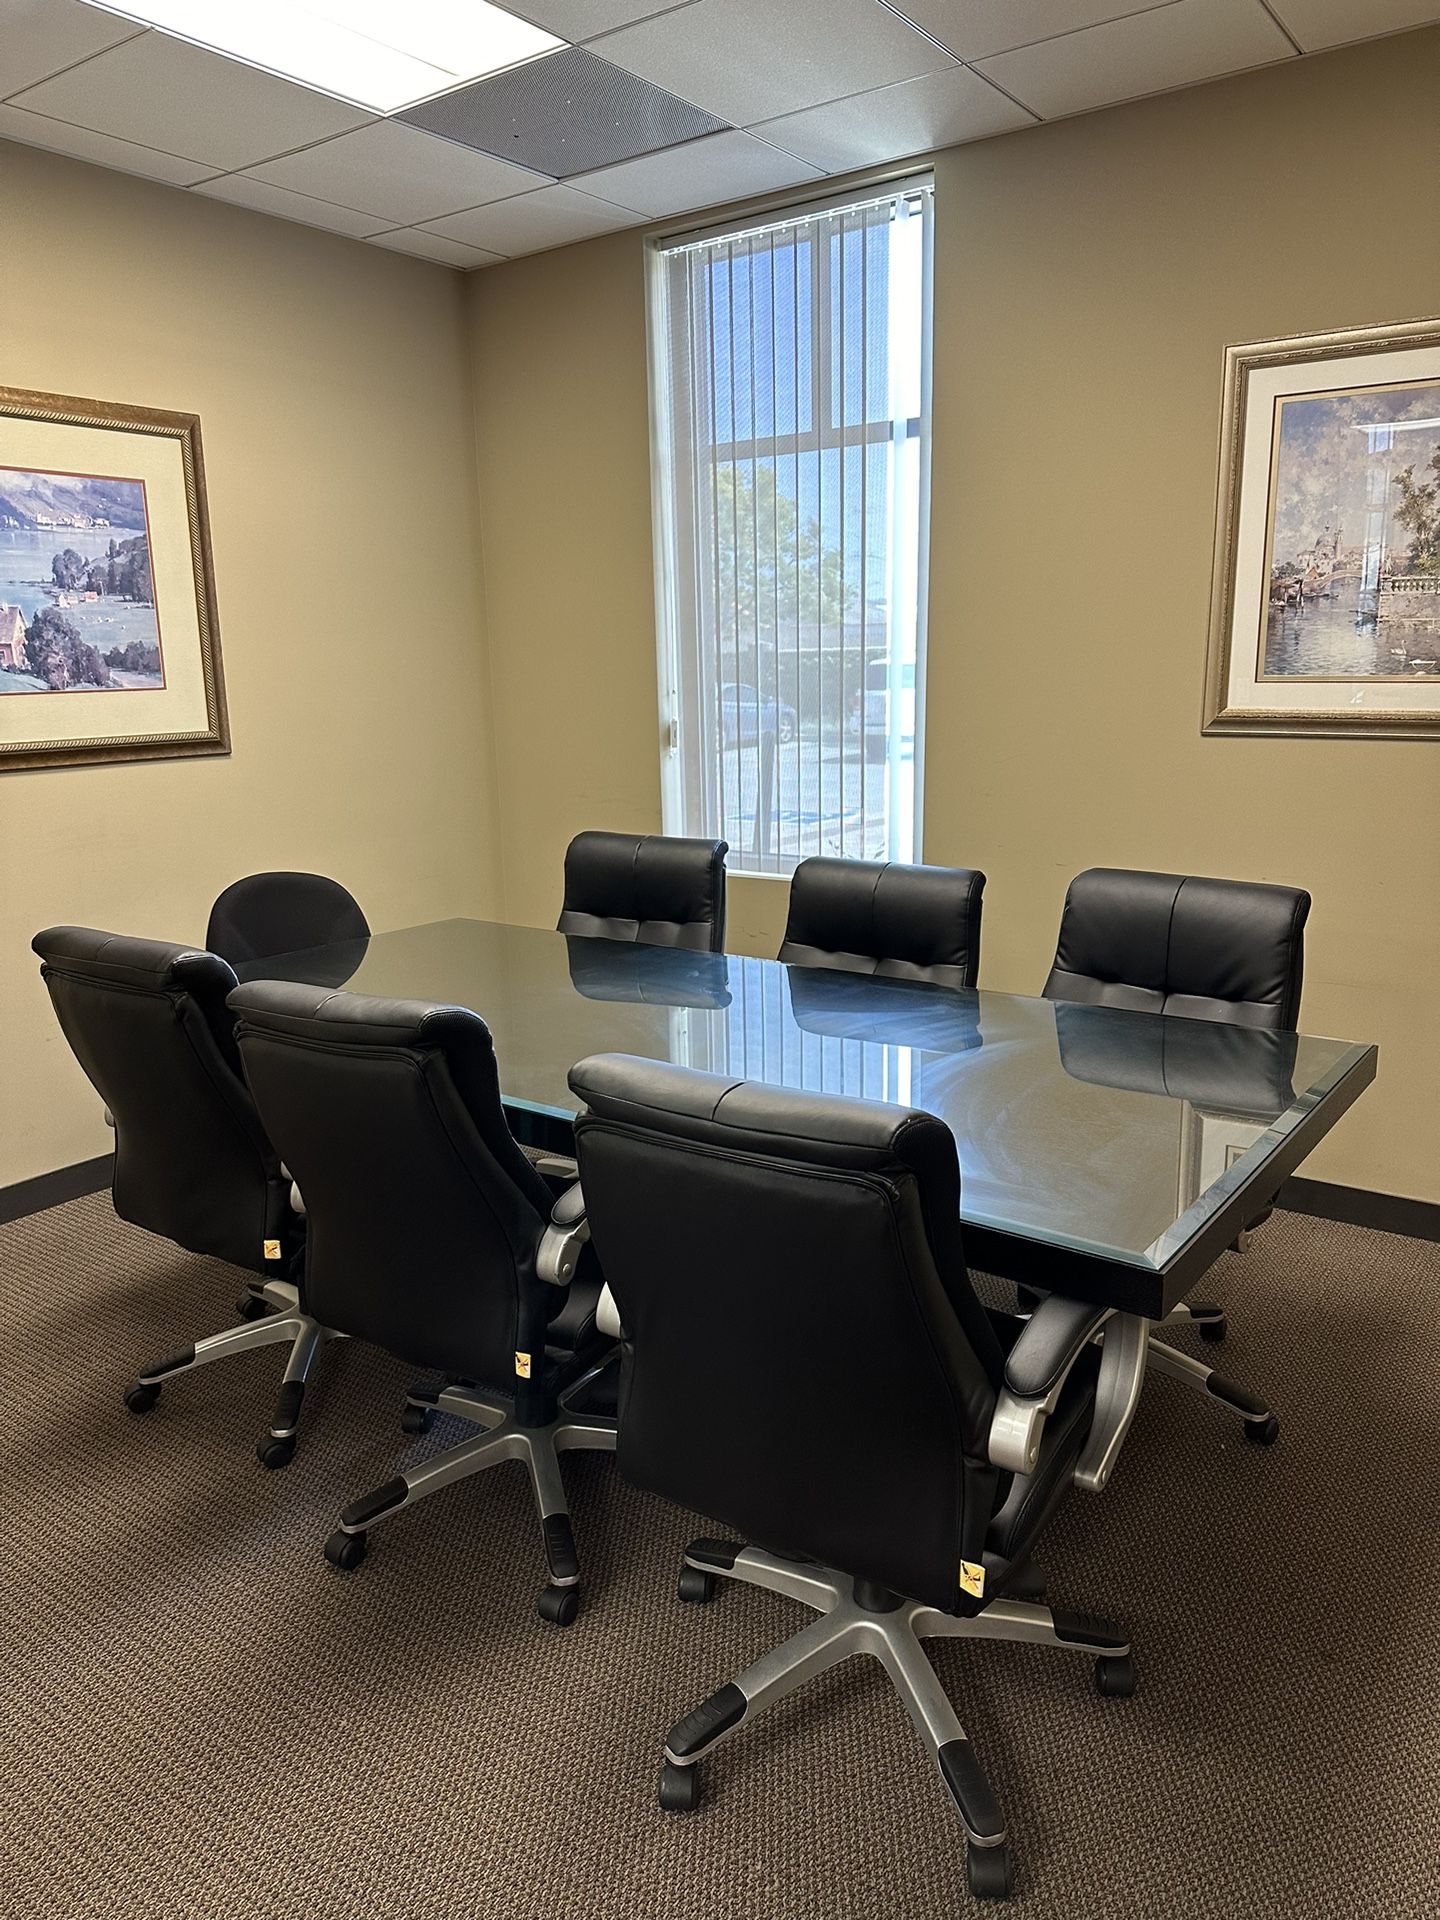 Conference Table + 6 Chairs 